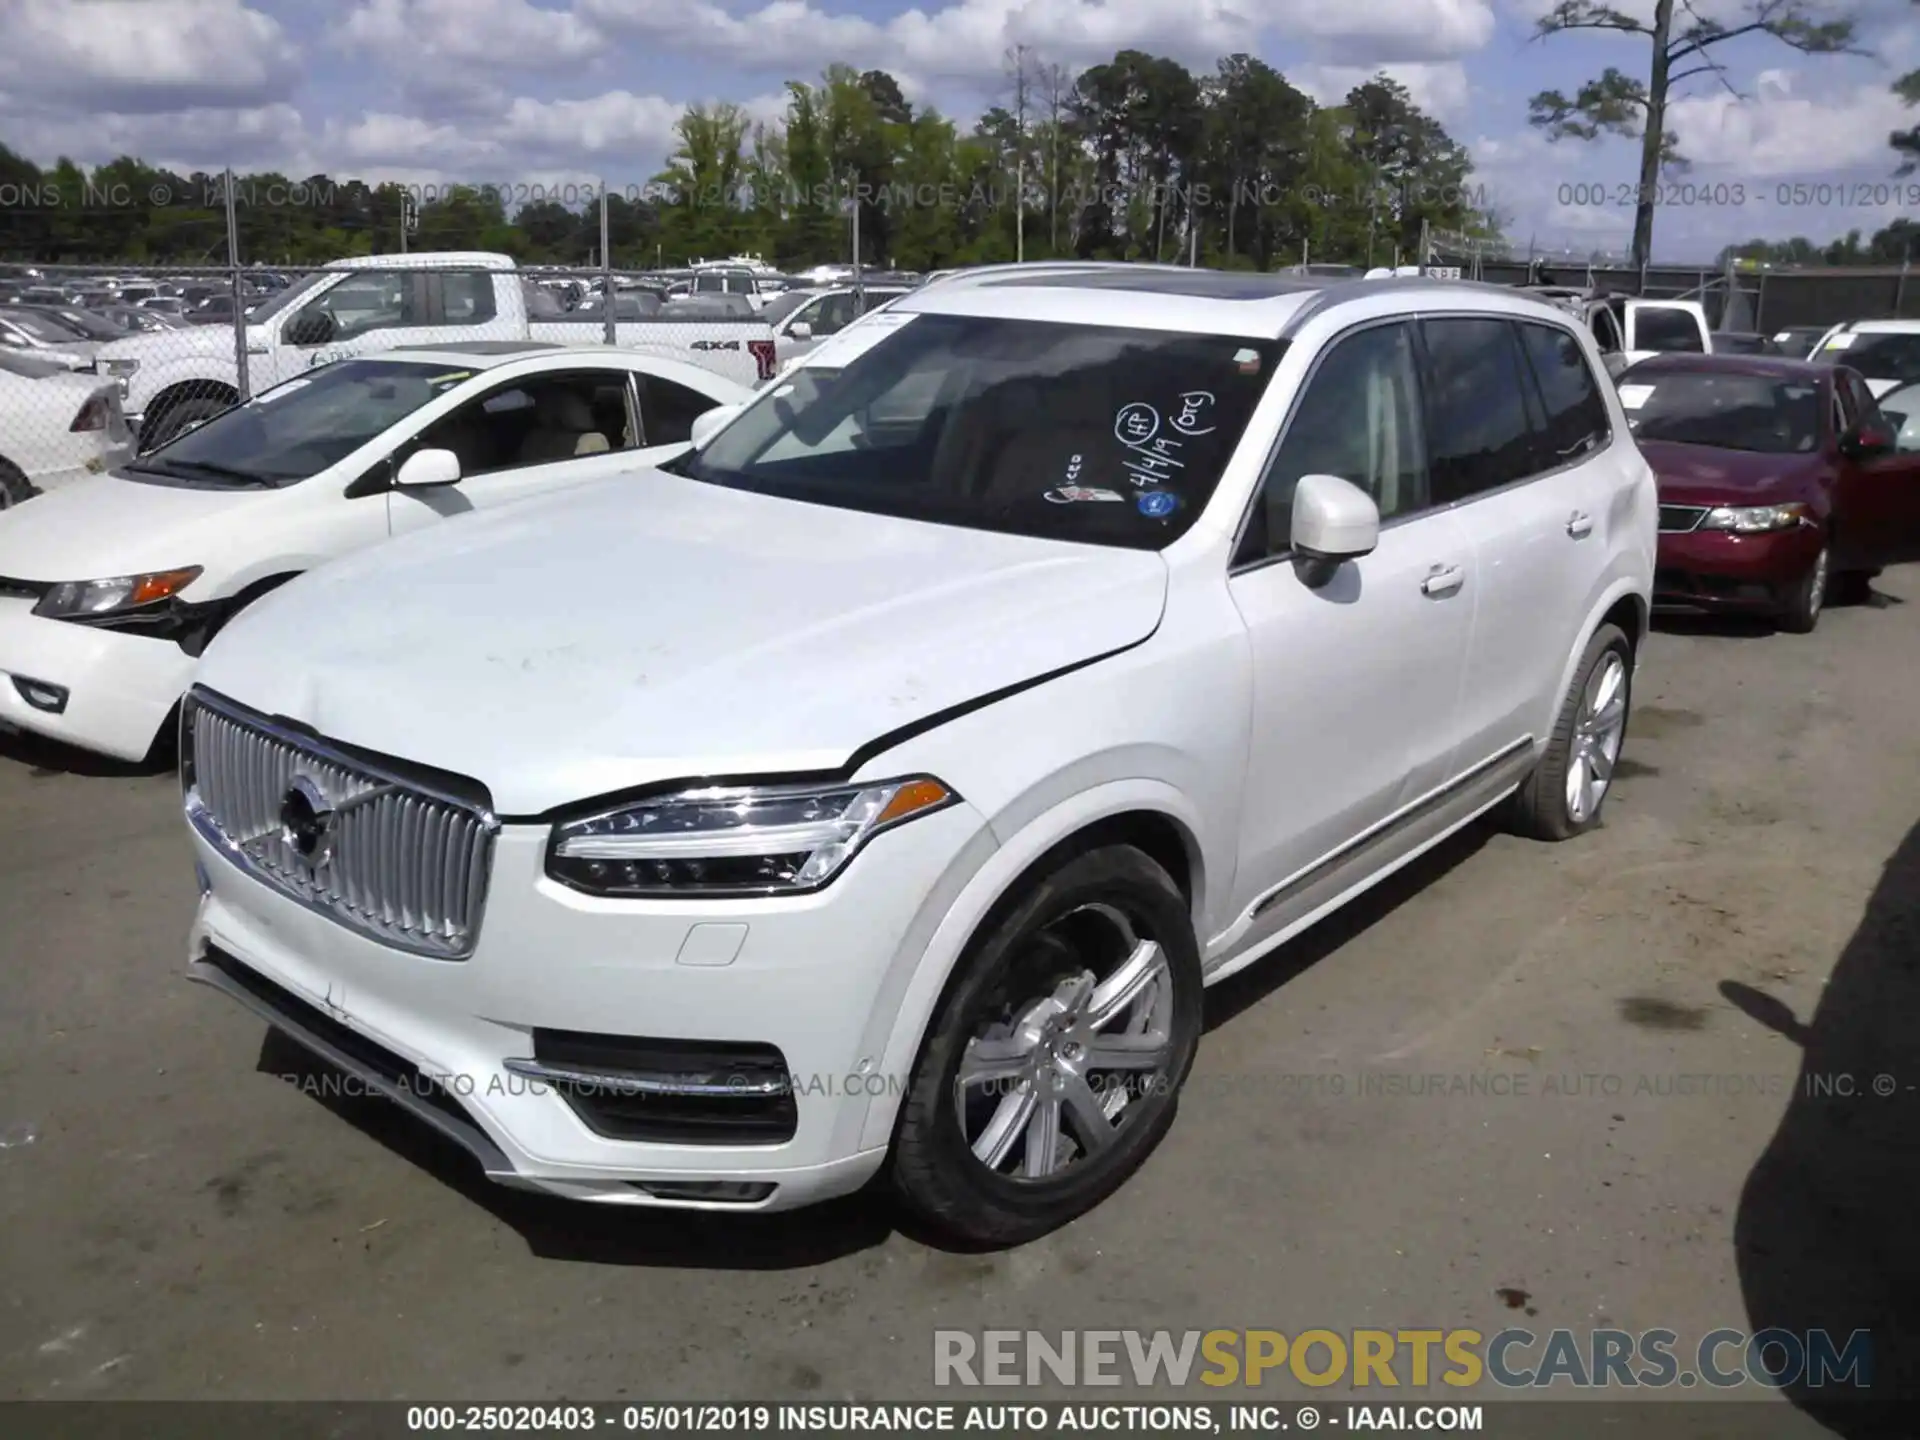 2 Photograph of a damaged car YV4A22PLXK1431420 VOLVO XC90 2019